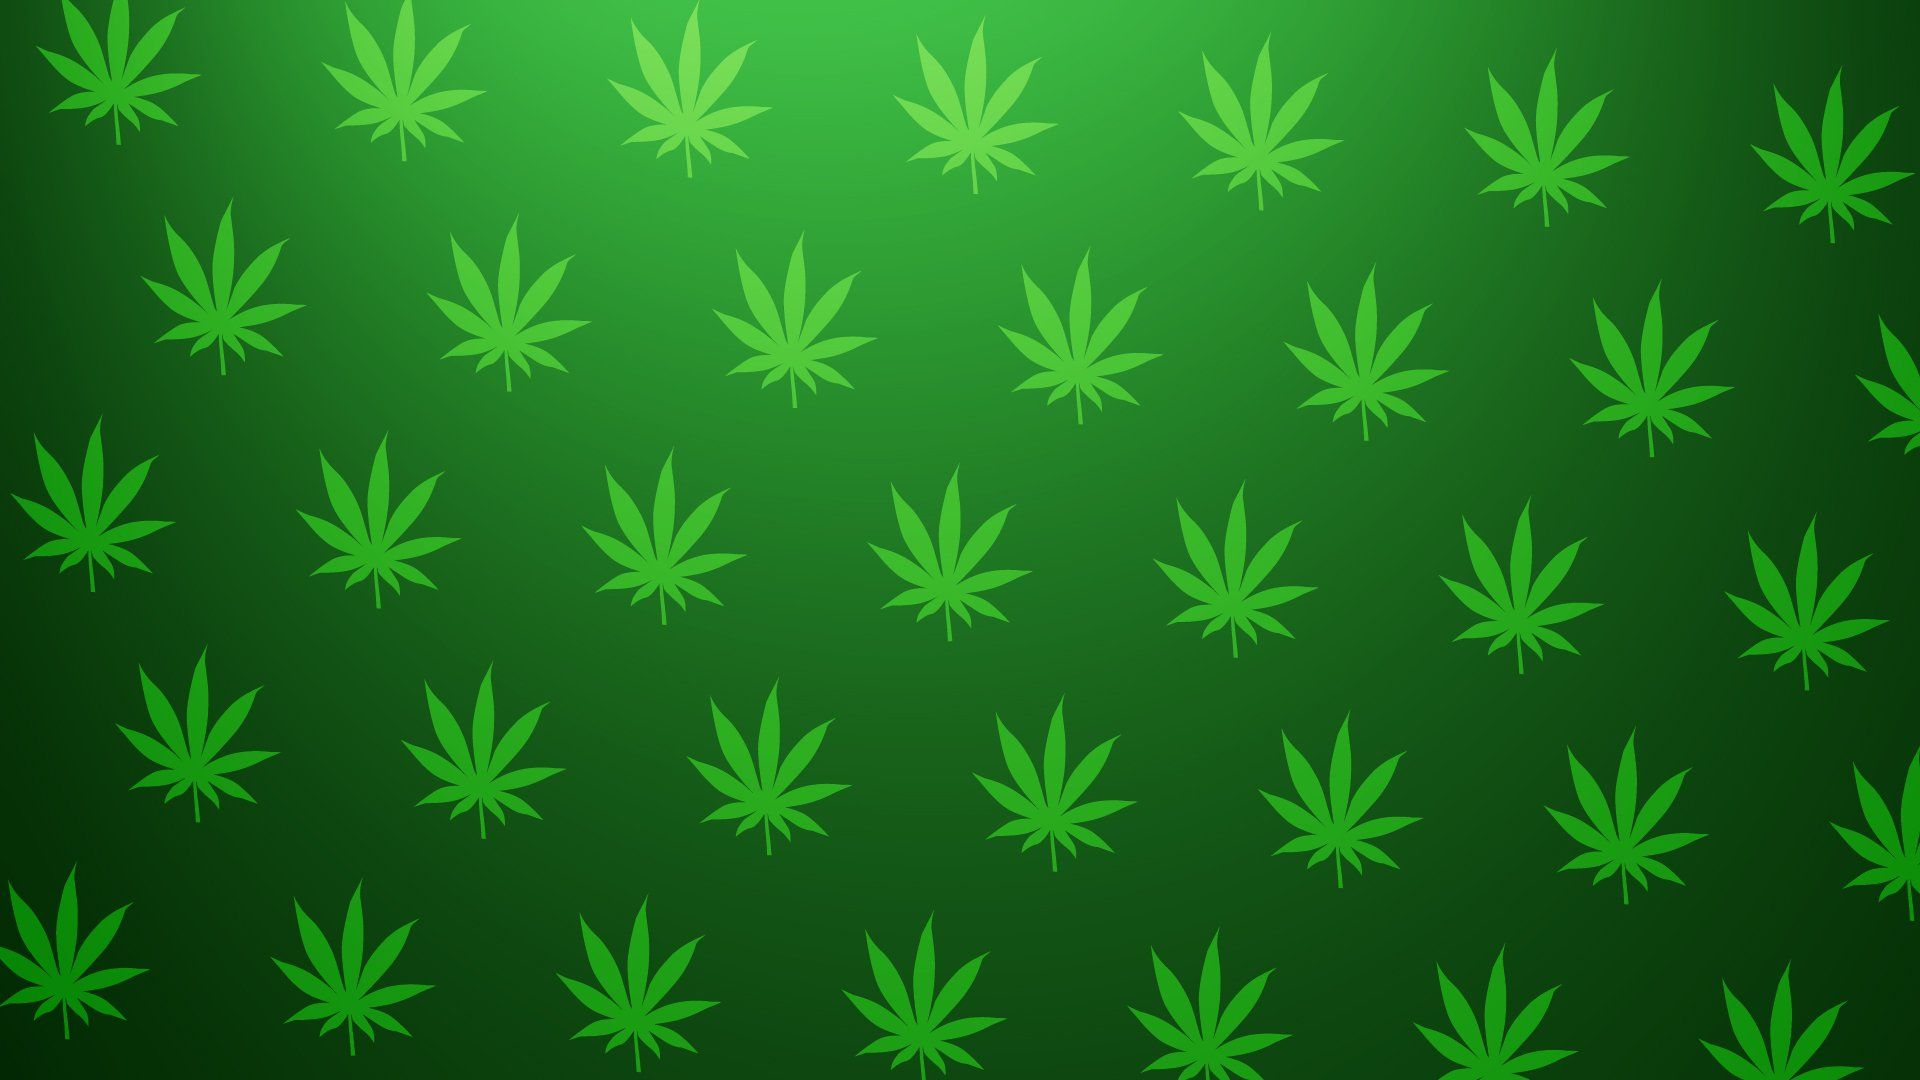 Weed Background. Weed Girl Wallpaper